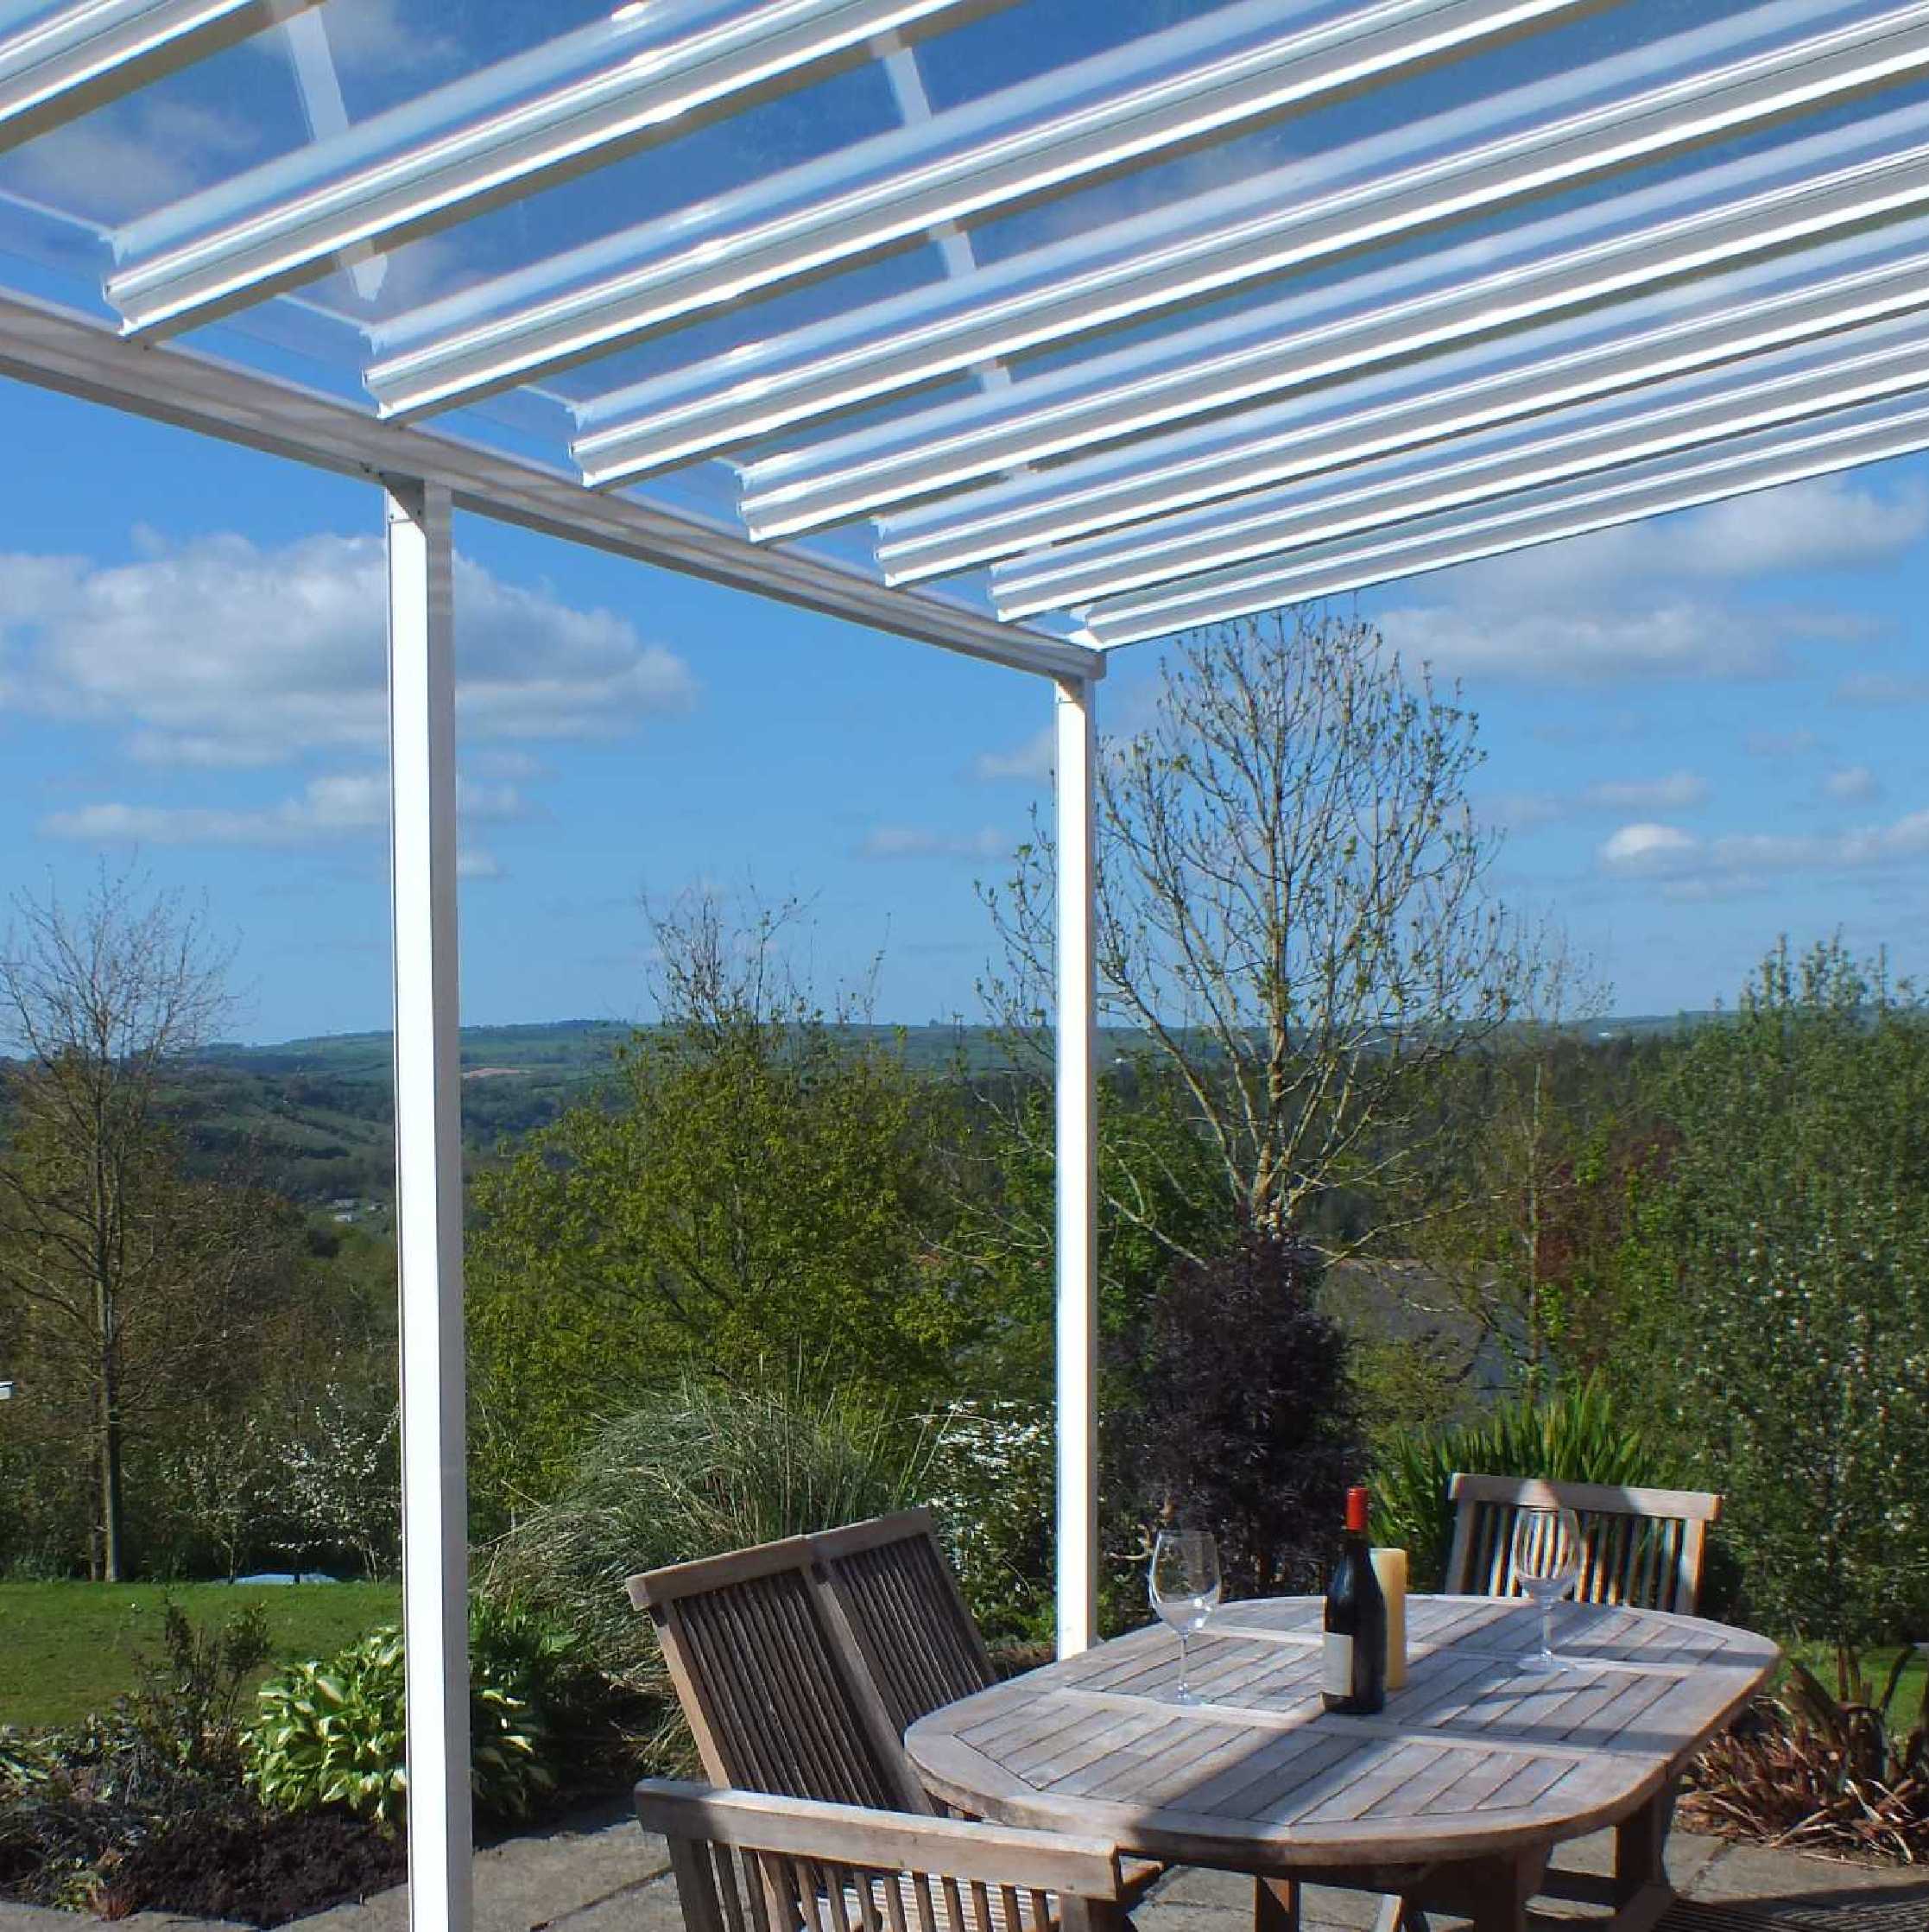 Buy Omega Smart Lean-To Canopy, White UNGLAZED for 6mm Glazing - 7.7m (W) x 2.0m (P), (4) Supporting Posts online today